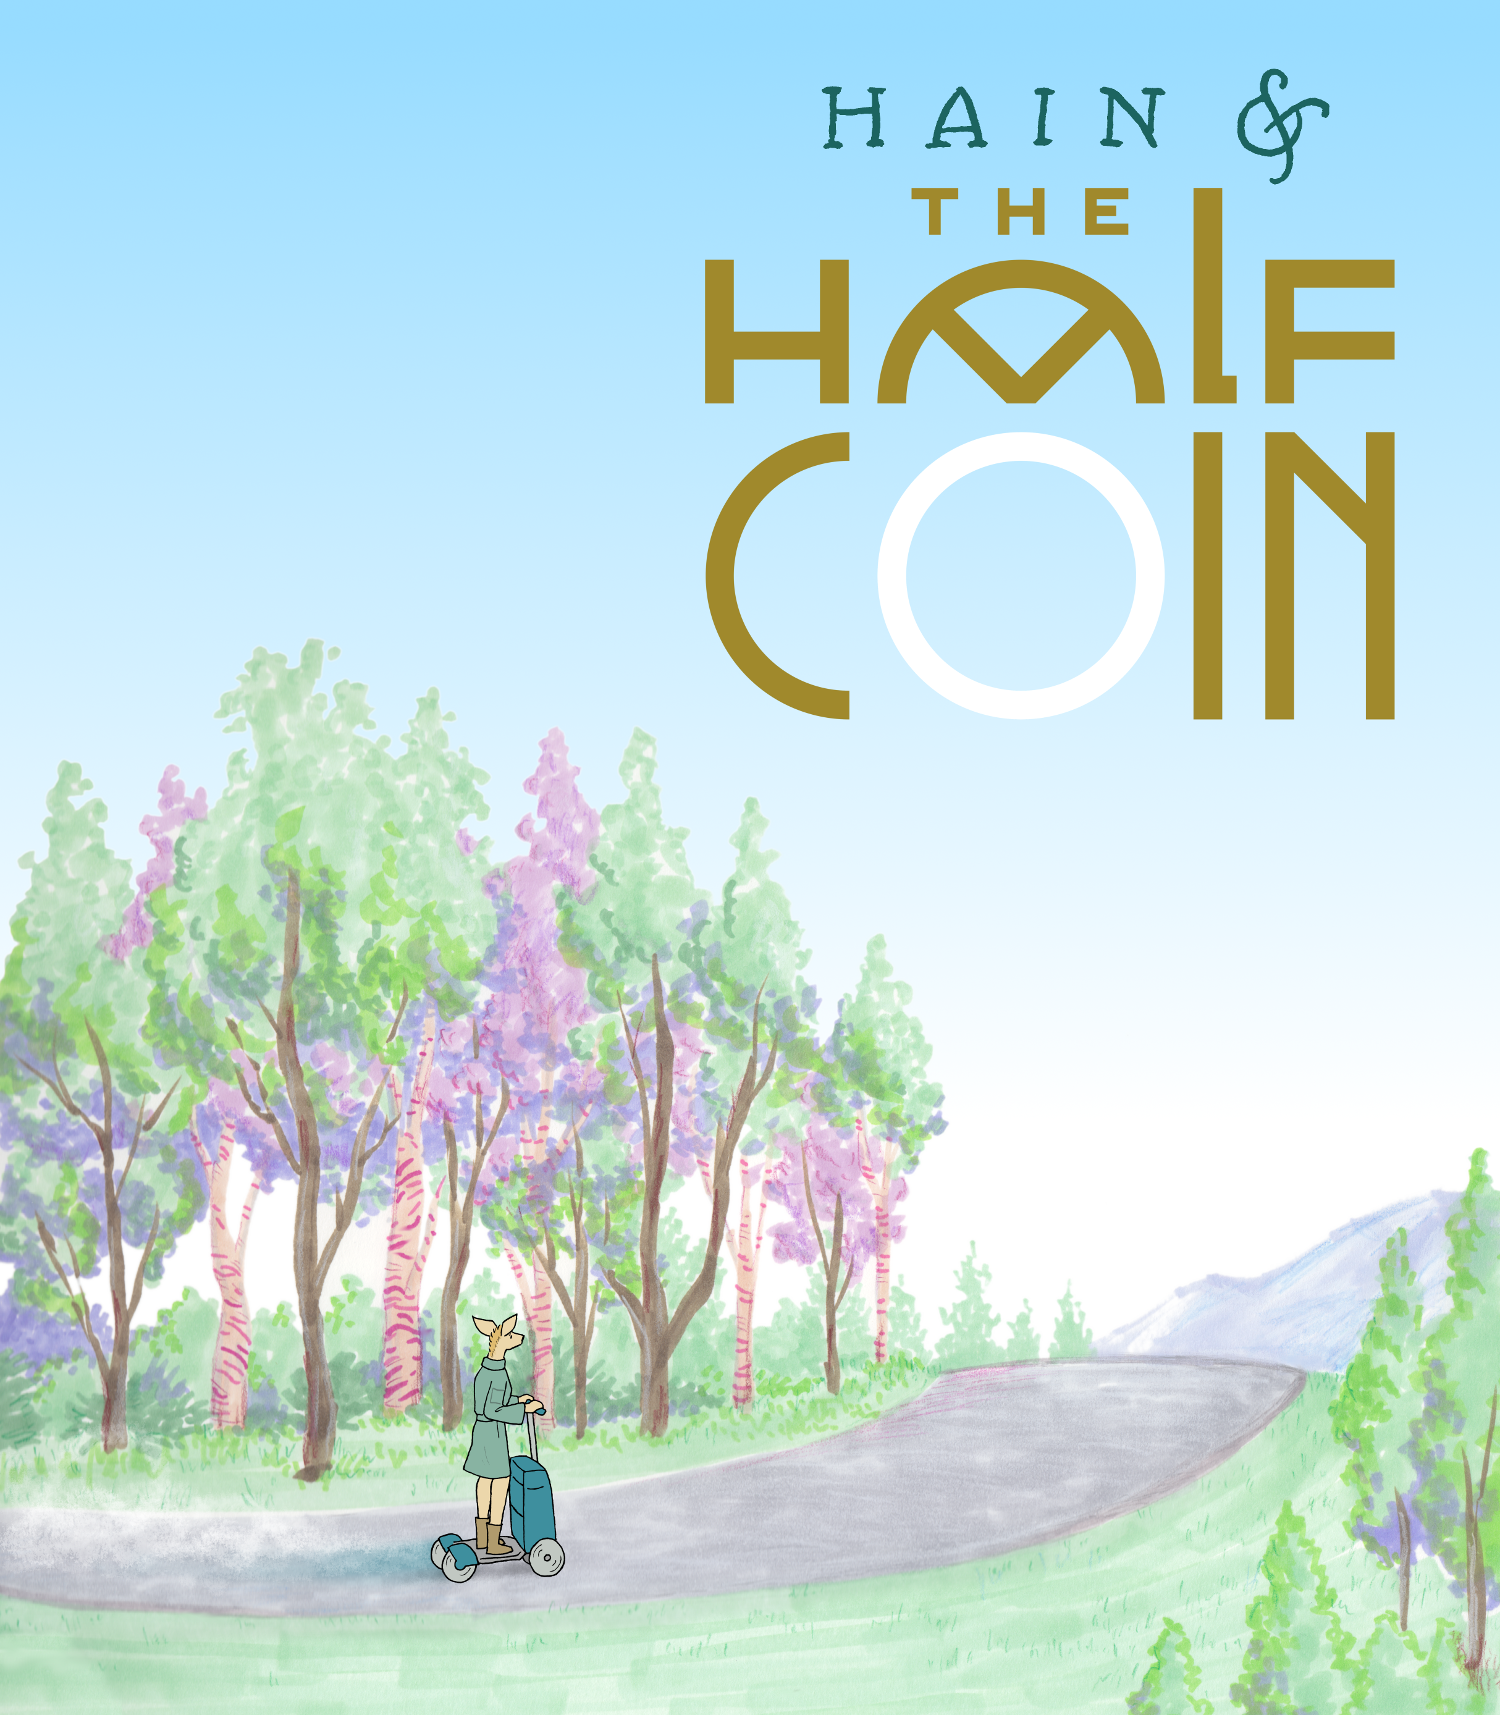 Hain and the Half Coin